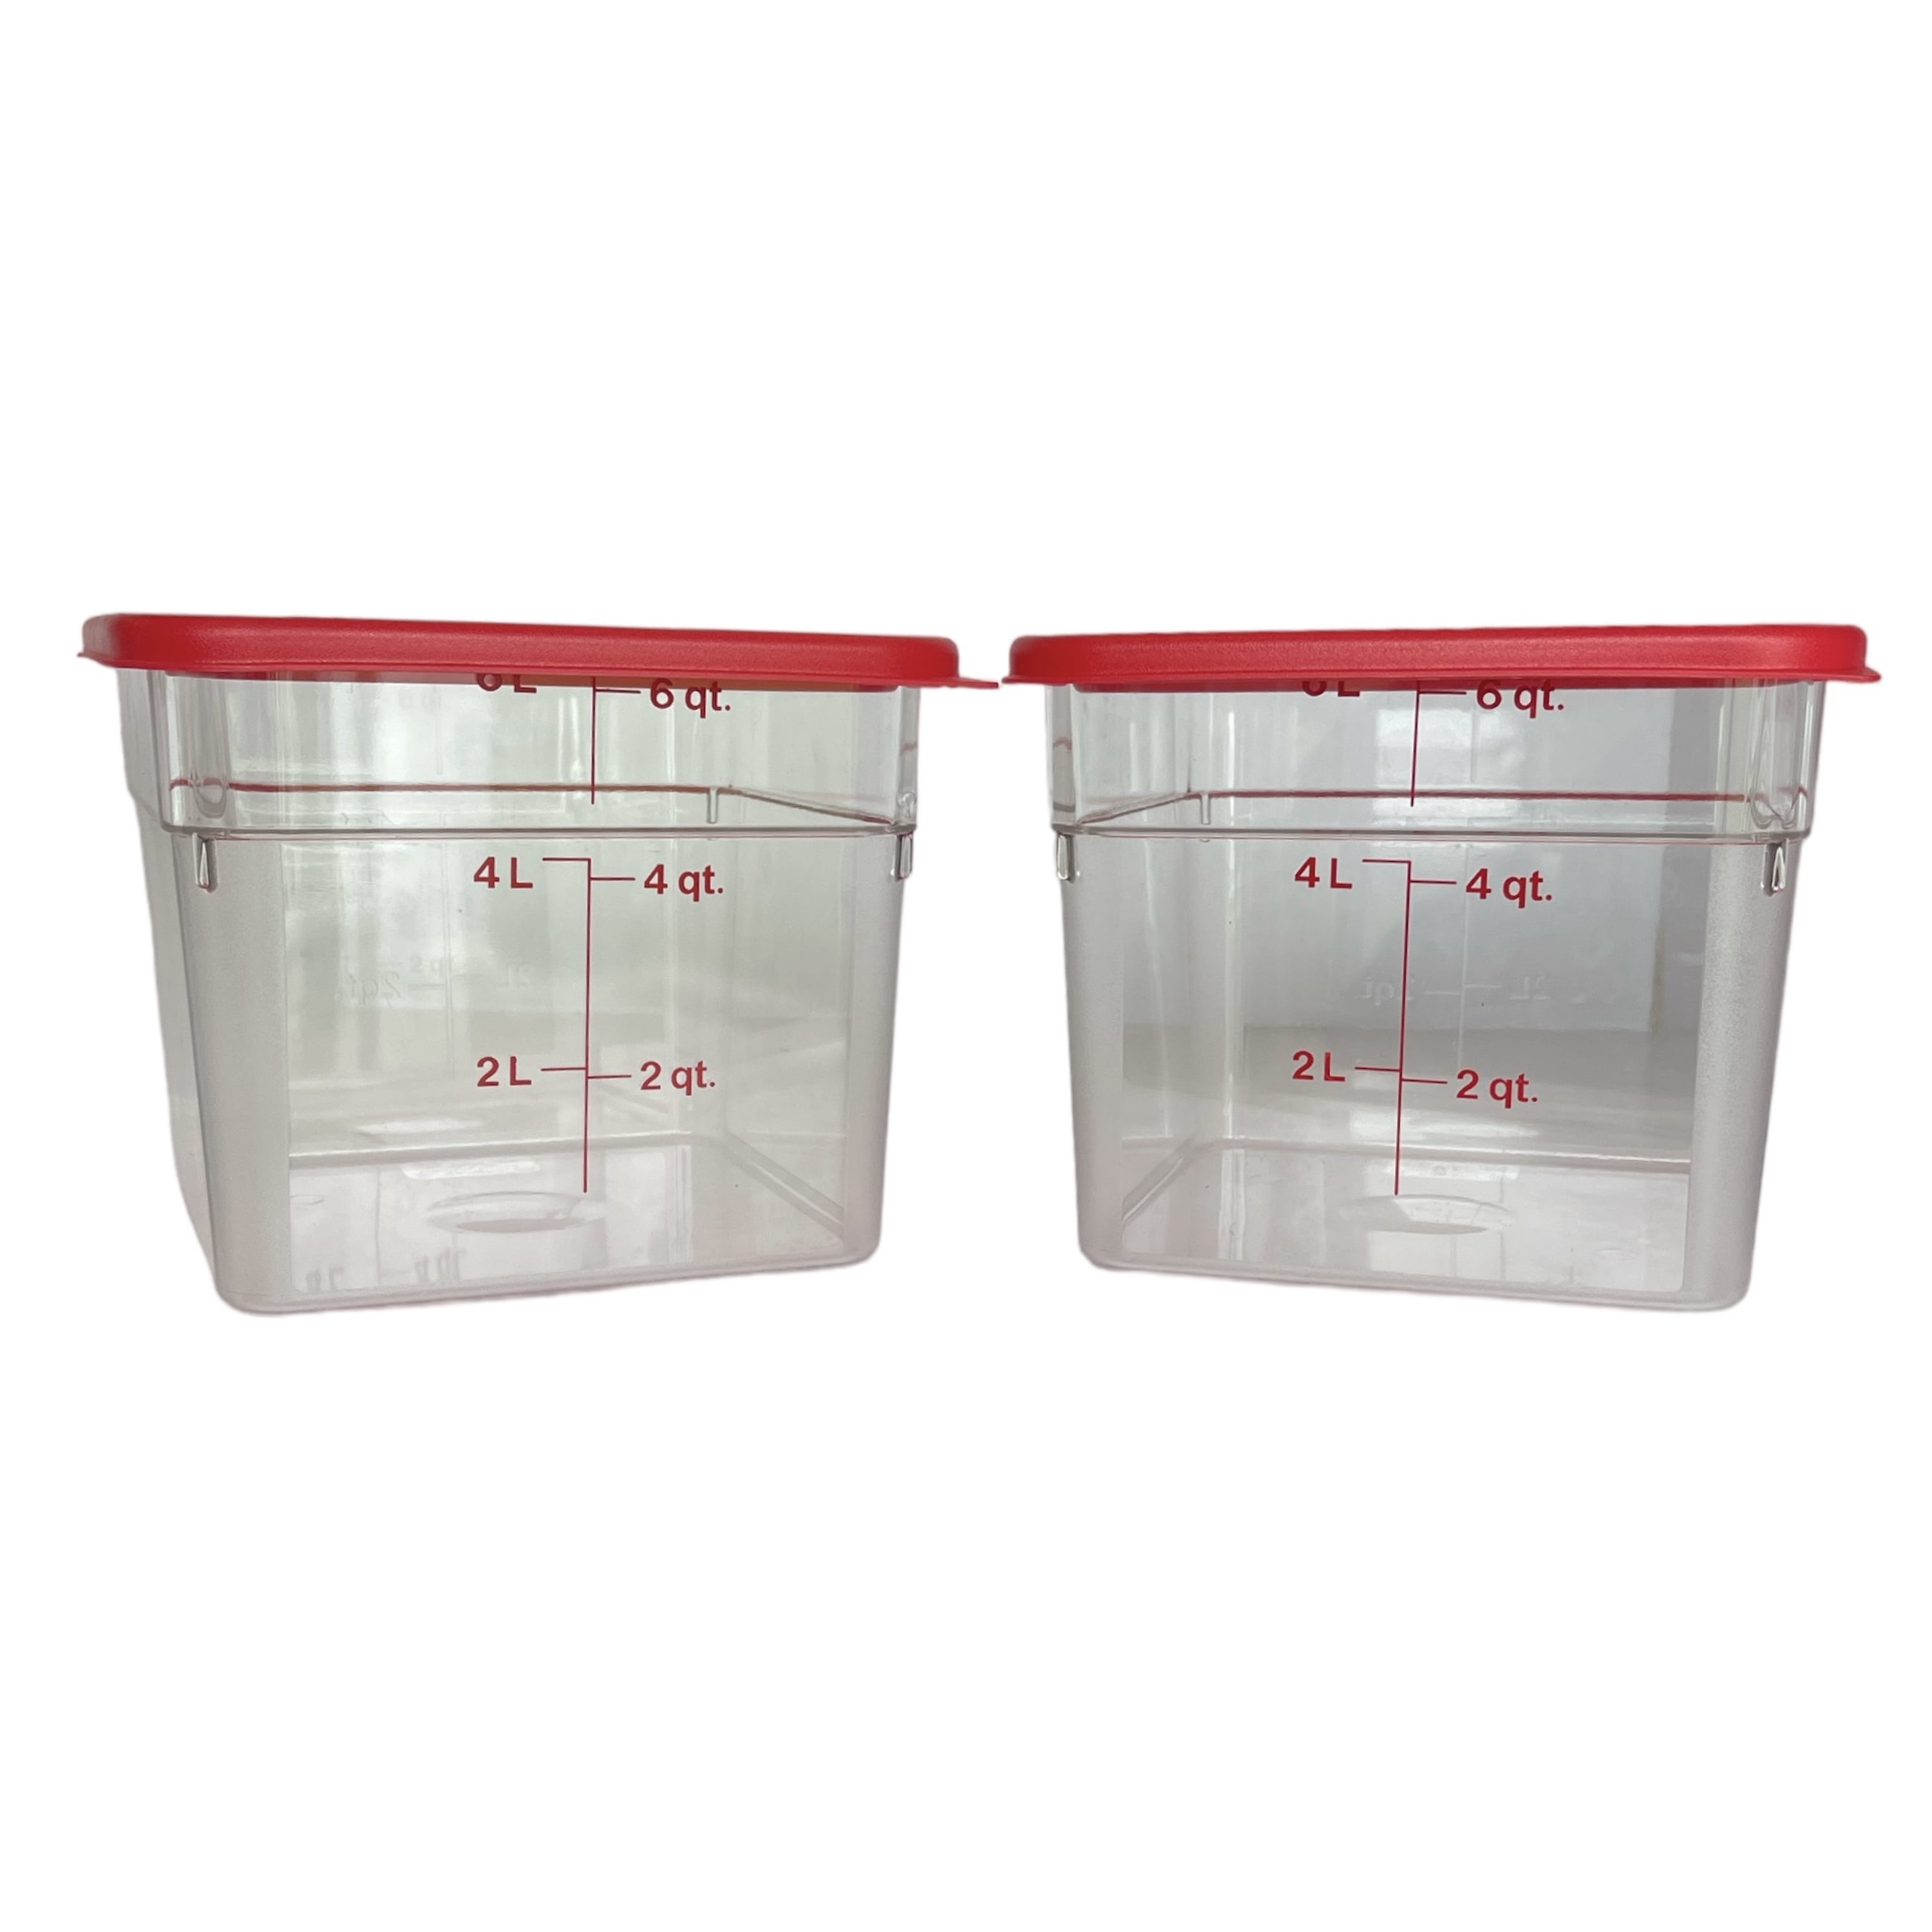 Cambro 6 qt. Food Storage Containers and Covers 2 ct. Set EACH